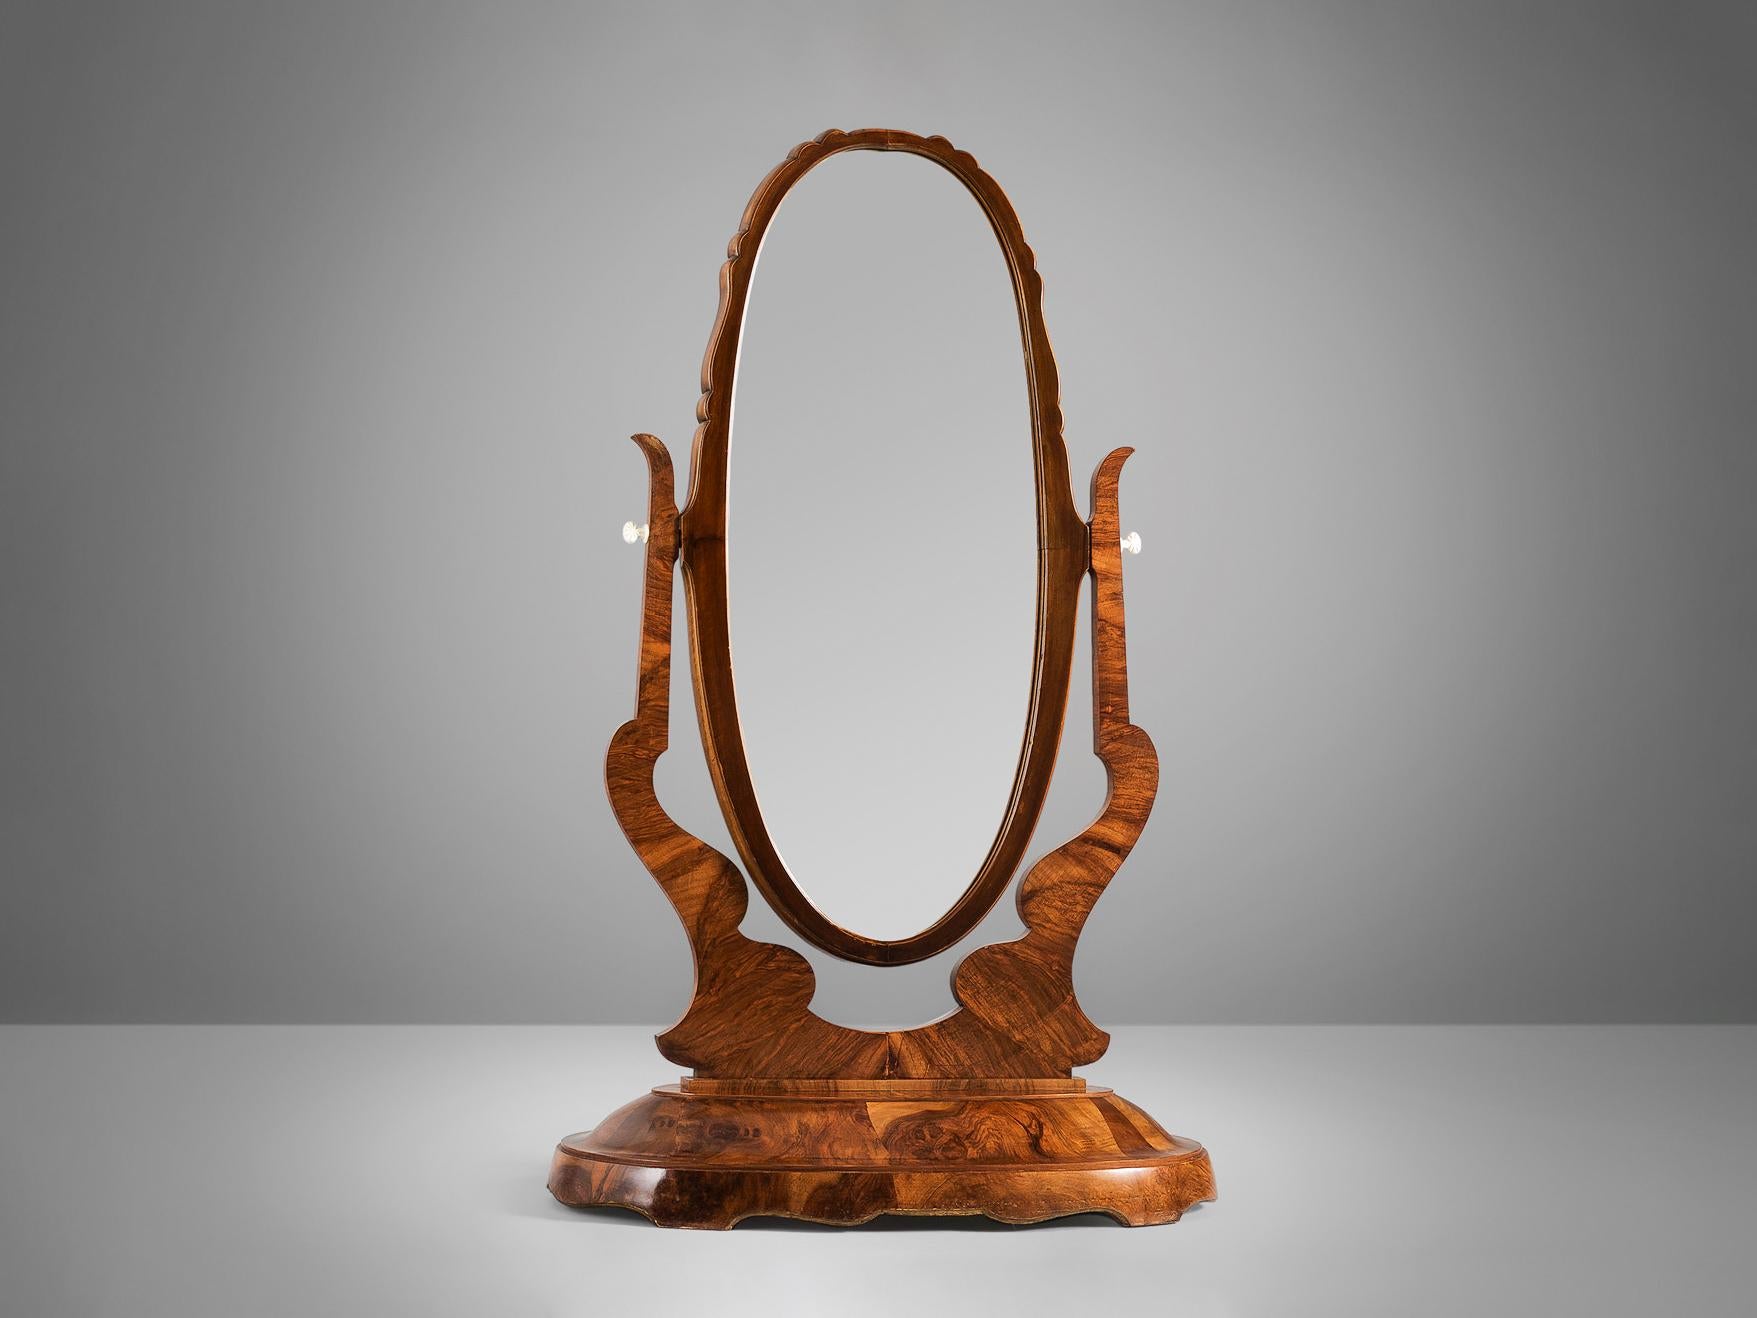 Dressing mirror, walnut burl, mirrored glass, Italy, 1940s.

Impressive and elegant dressing Italian mirror. The wood shows a wonderful grain and the walnut burl details are very beautiful and distinctive. The oval mirror is adjustable for easy use.